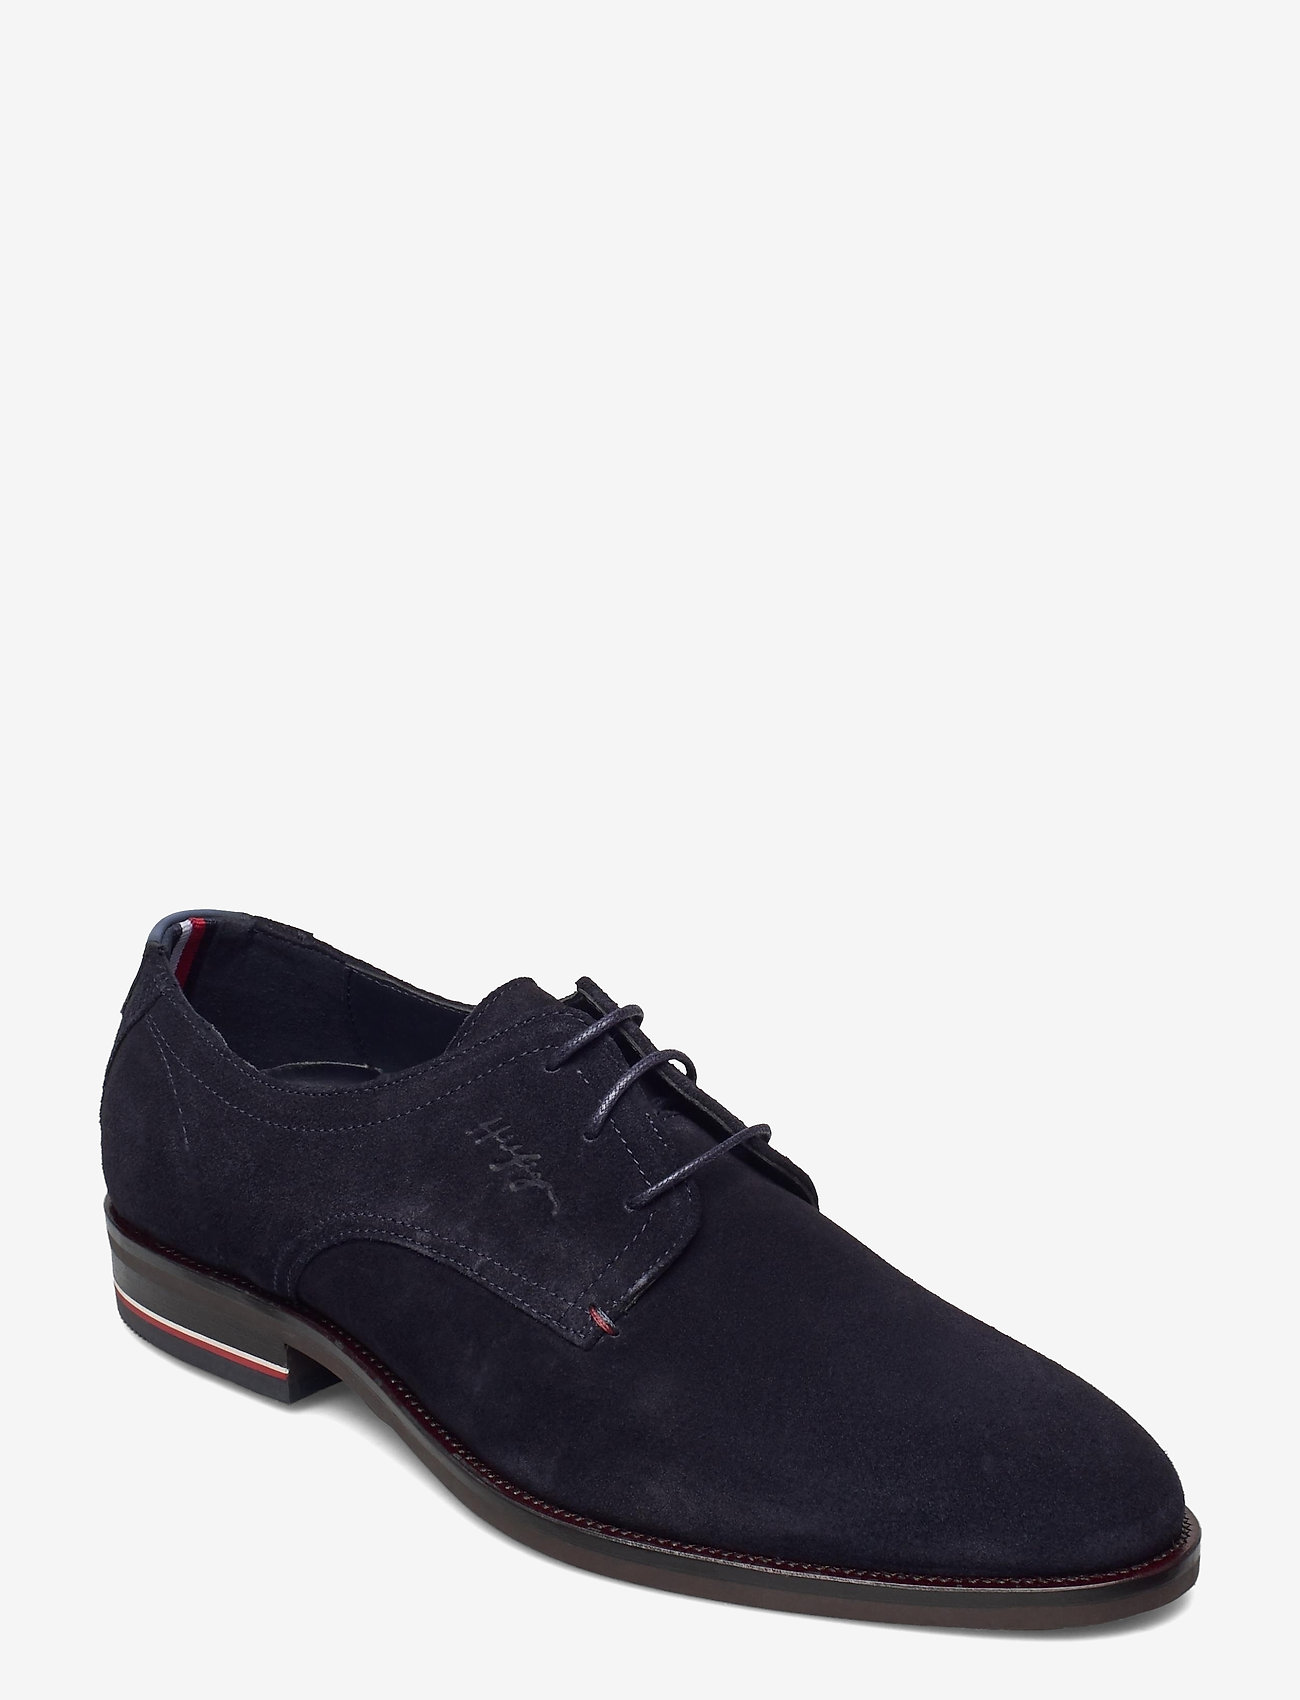 suede tommy hilfiger shoes